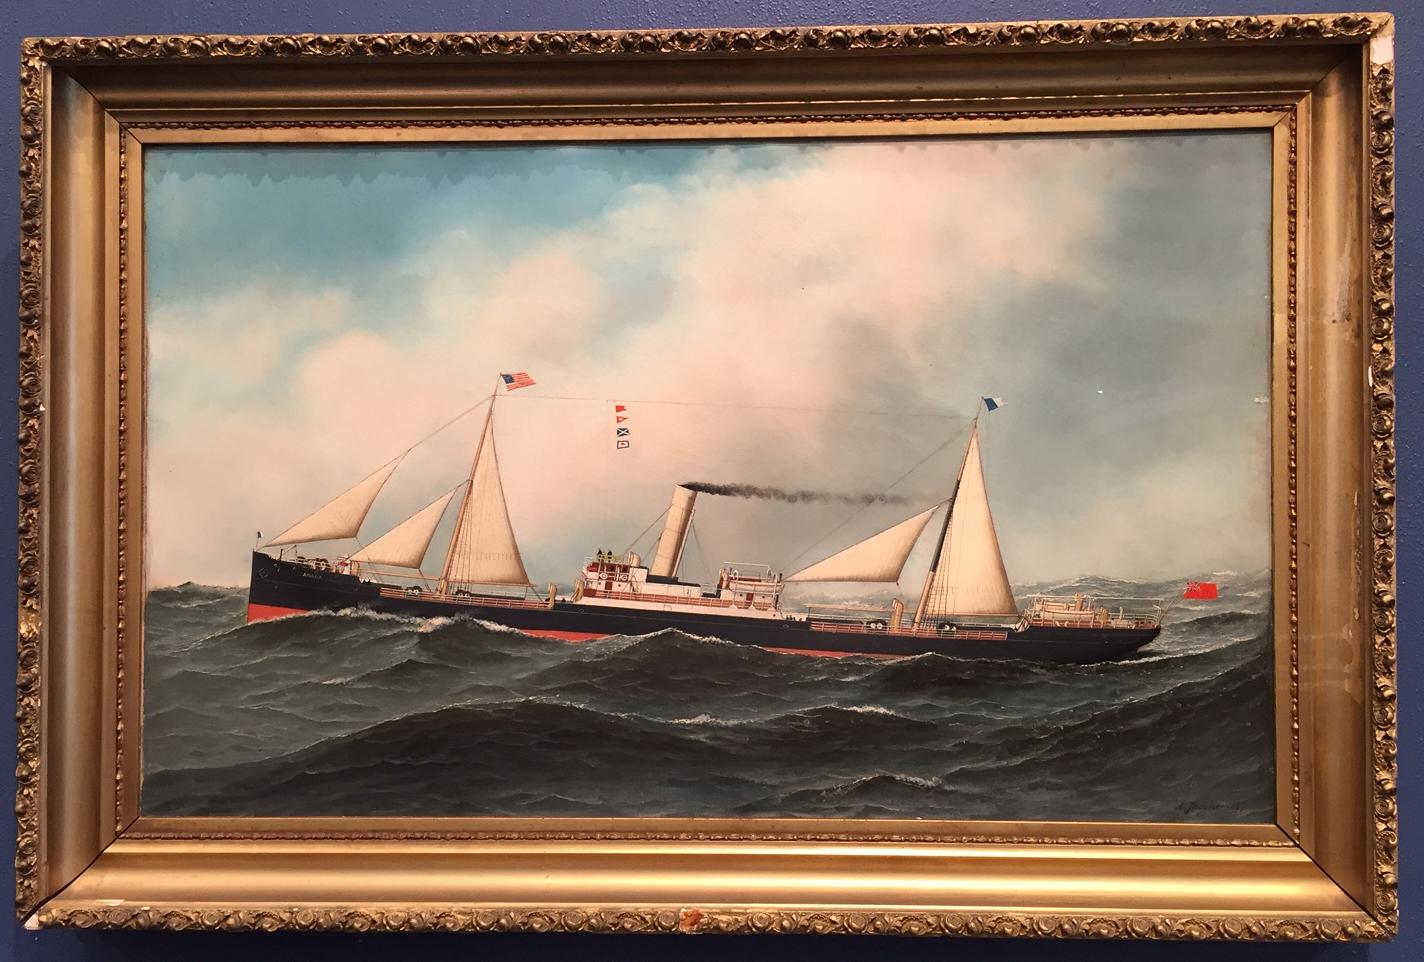 Transitional Steamship Anapa	 - Painting by Antonio Jacobsen